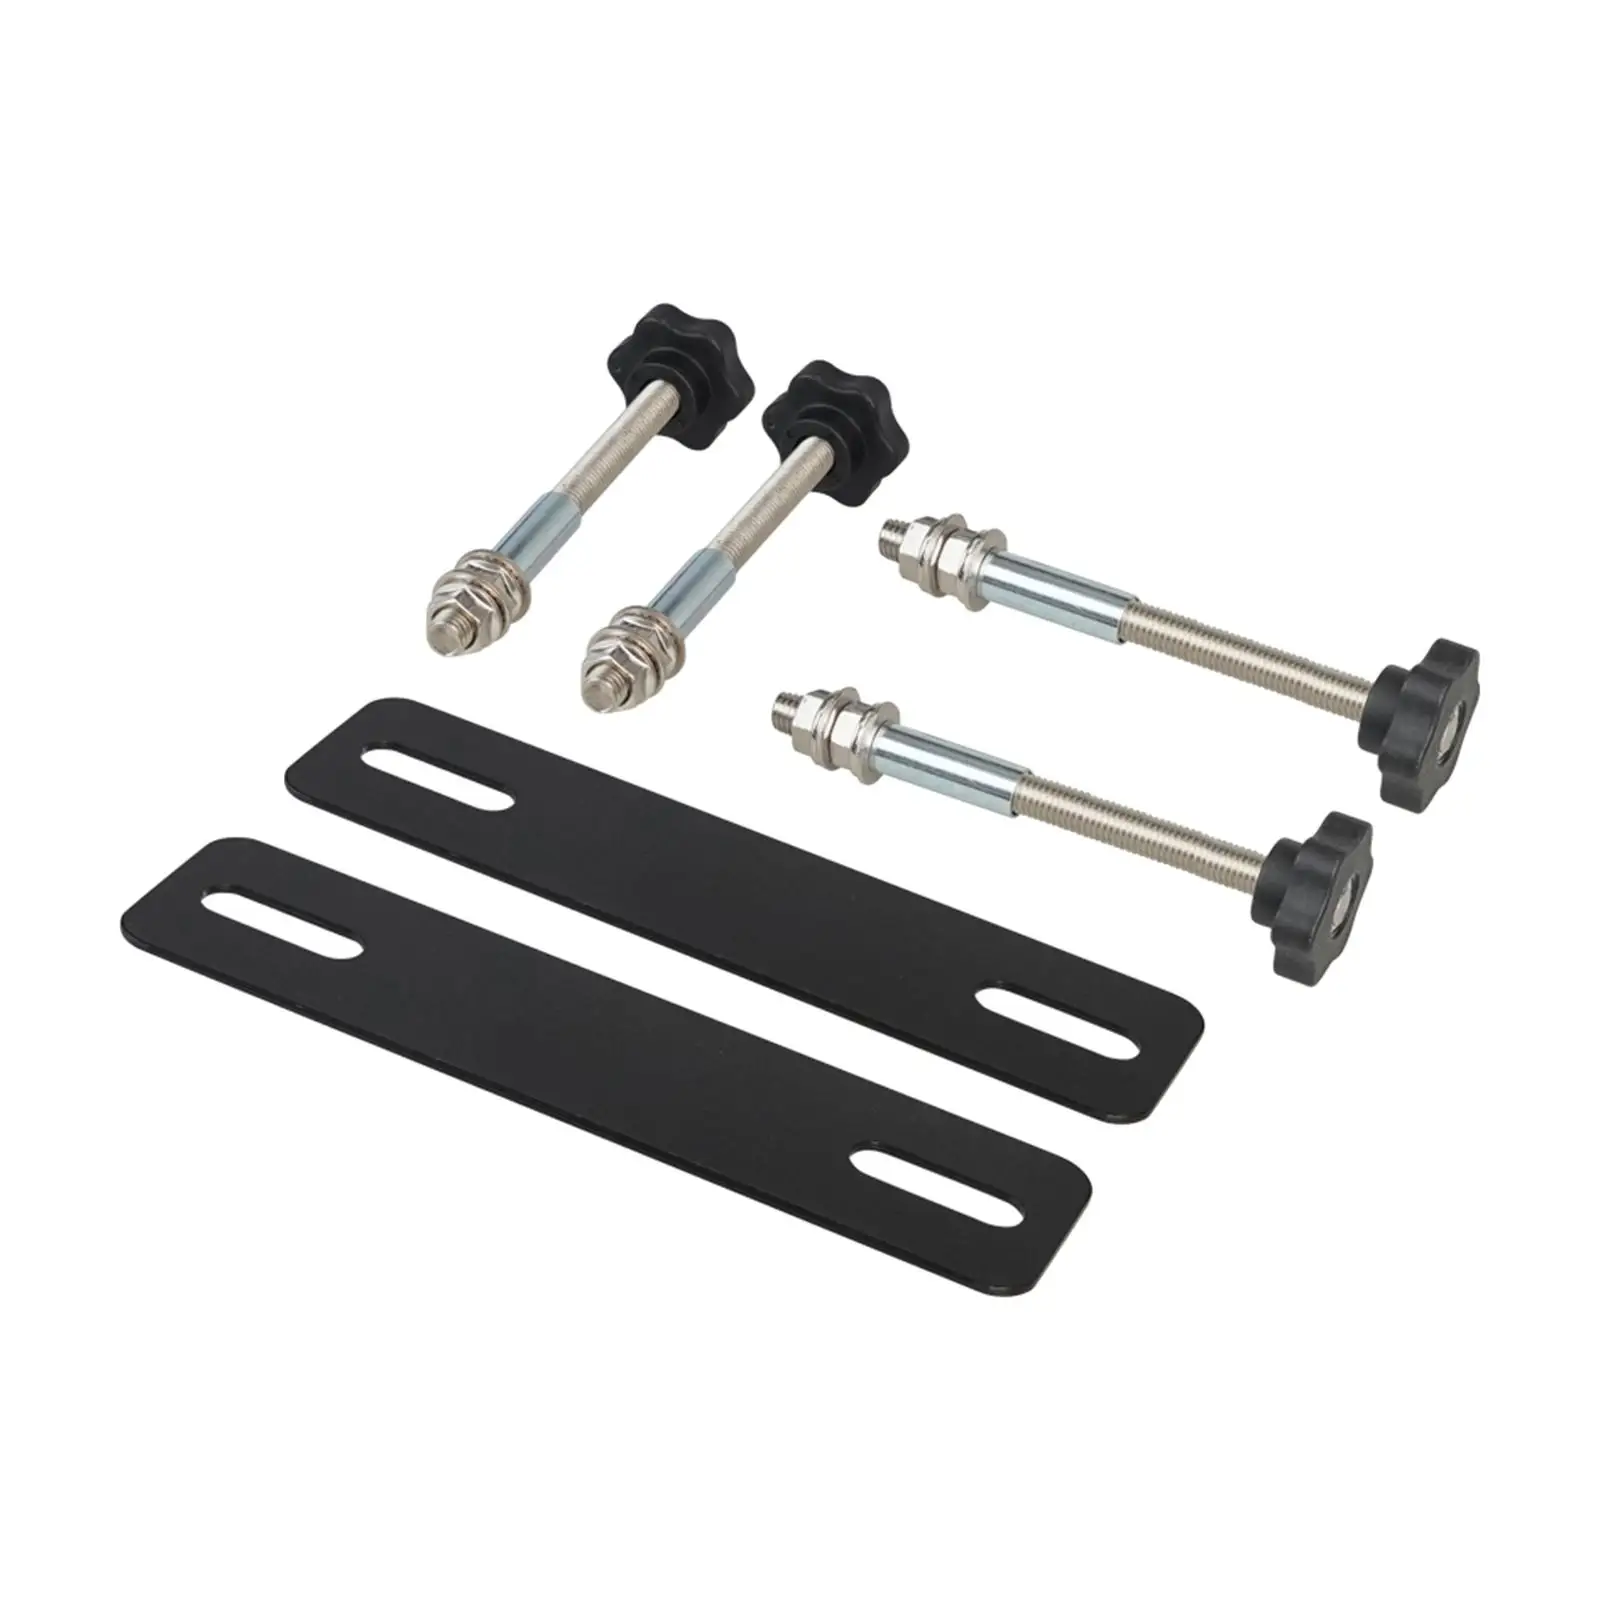 Mounting Pins Kits Professional Accessory Repair Parts for Traction Boards